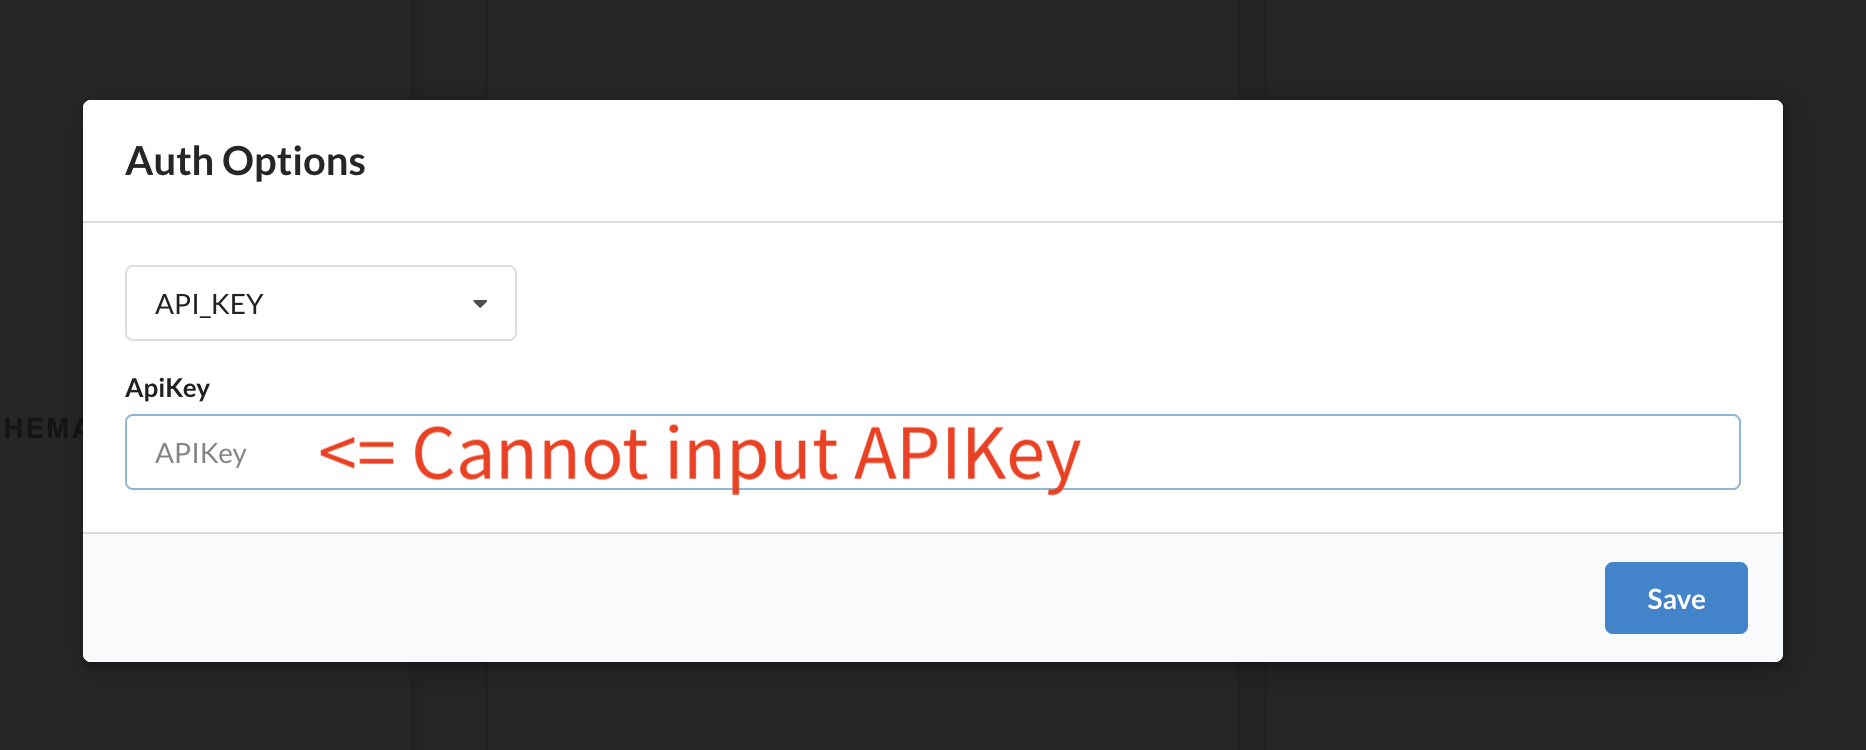 apikey cannot be updated